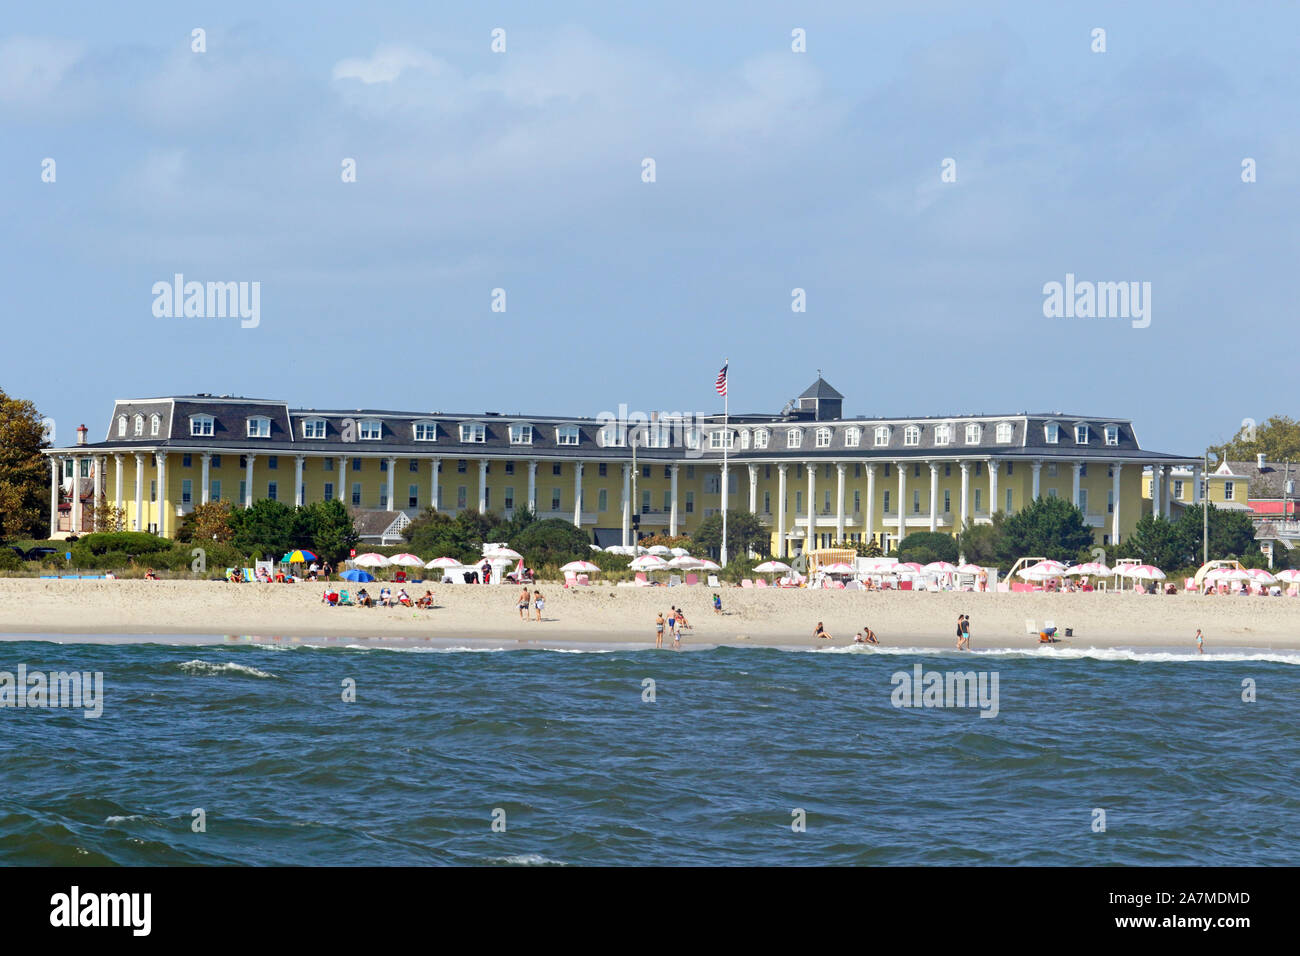 The historic Congress Hall resort hotel in Cape May, New Jersey, USA as viewed from the Atlantic Ocean. Stock Photo